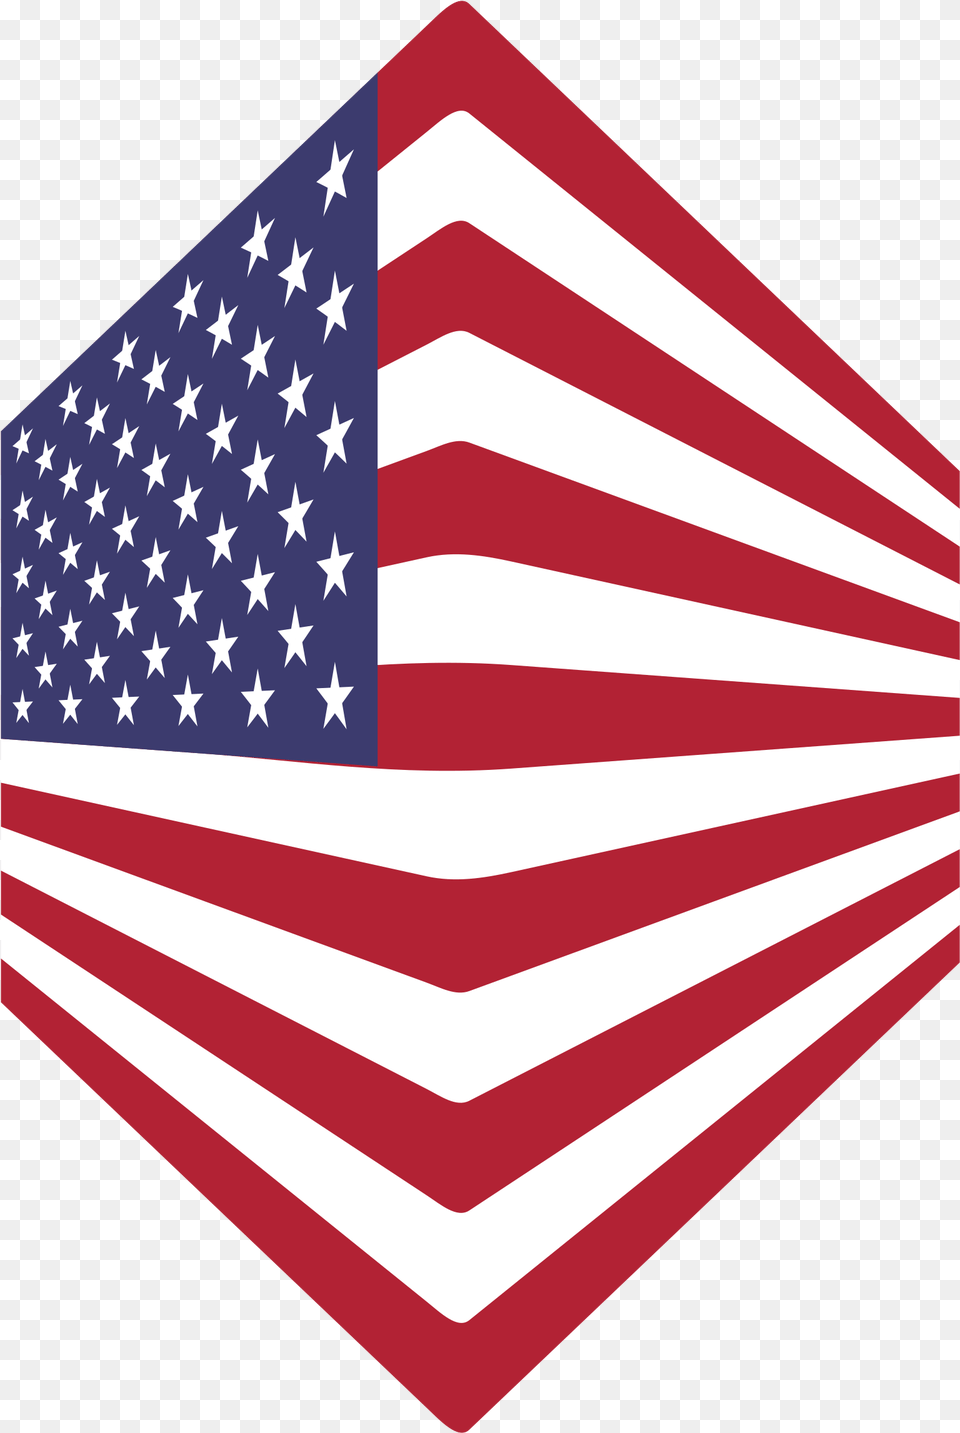 This Icons Design Of America Usa Flag Perspective, American Flag Png